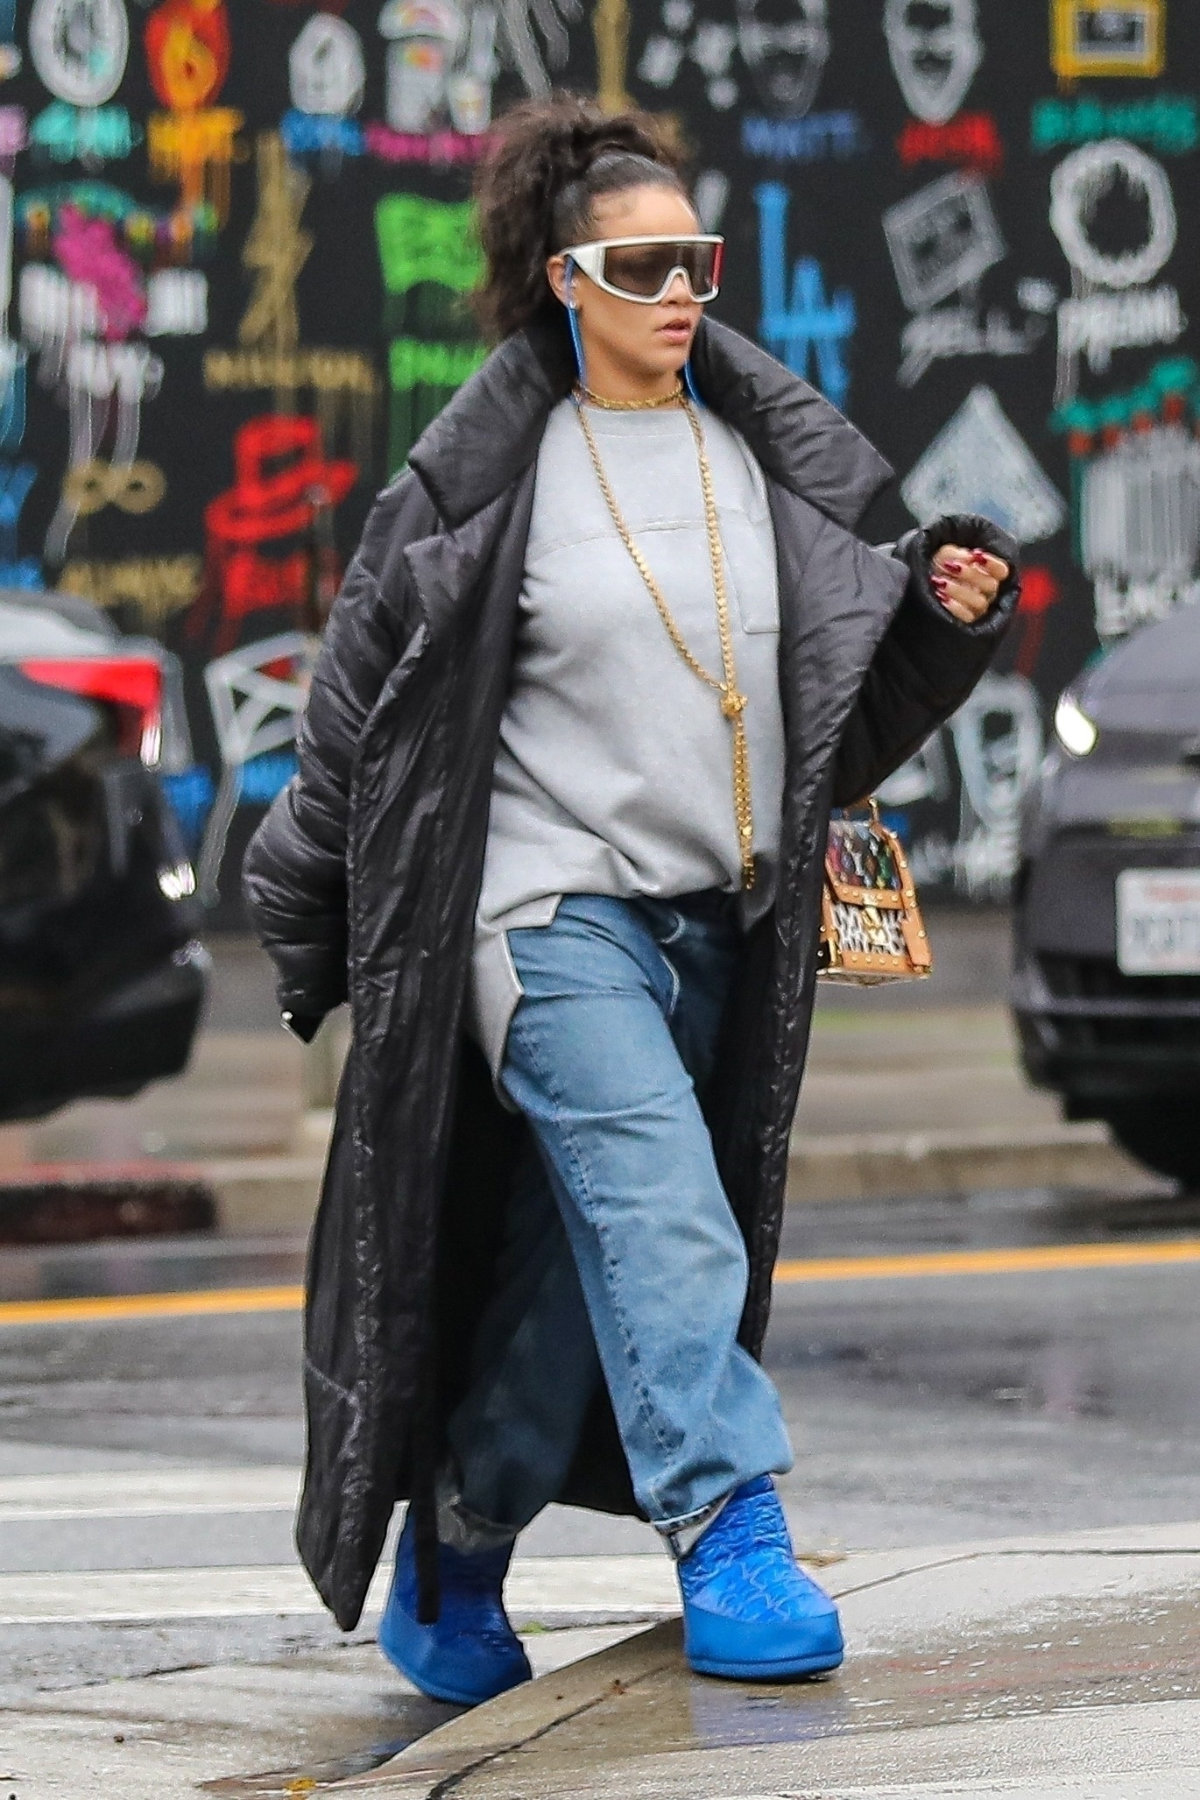 Vil have Skinnende sponsor Rihanna Styles Out in Gucci Vault Moon Boots and Louis Vuitton